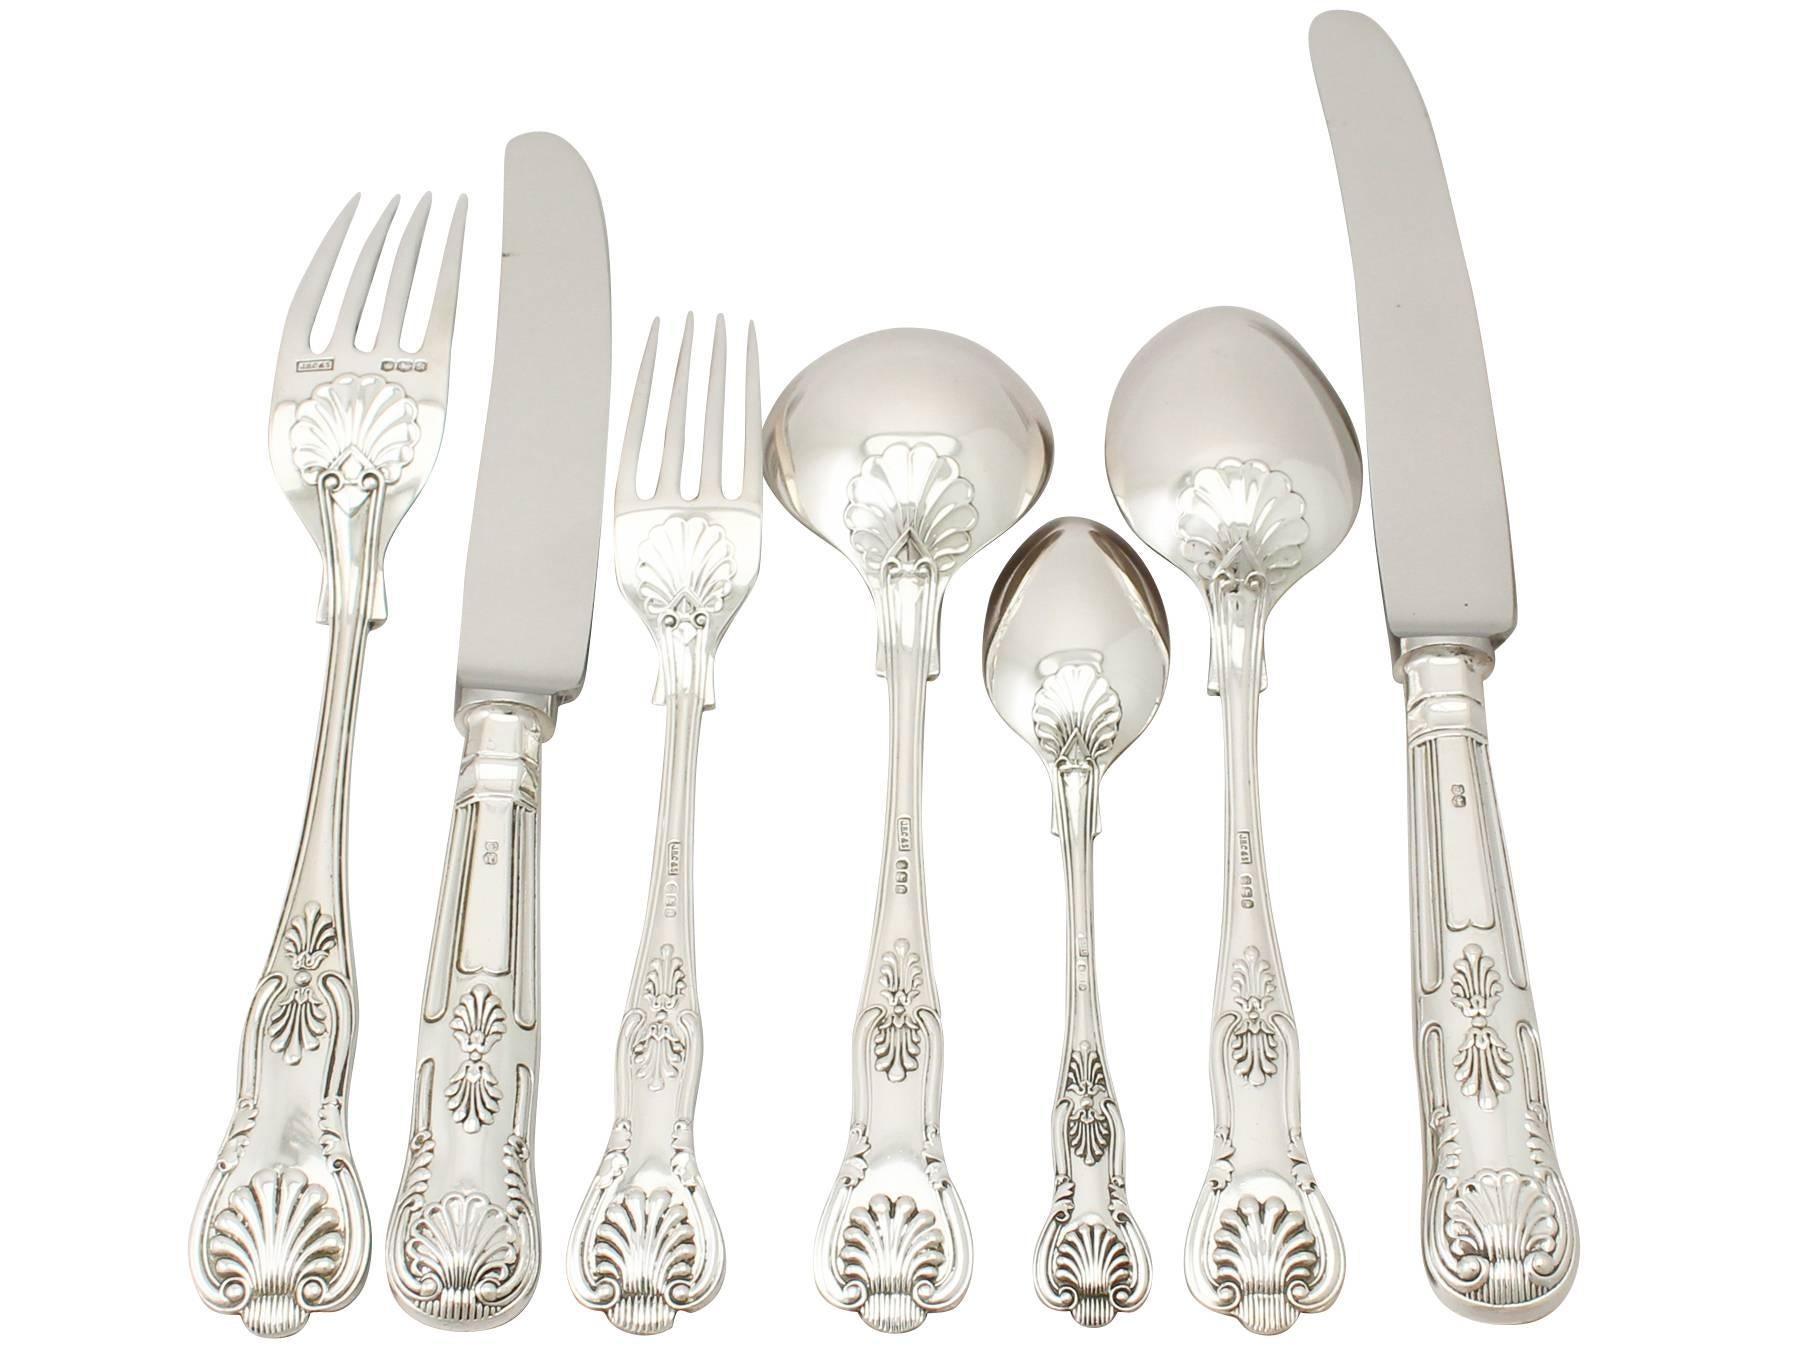 An exceptional, fine and impressive Elizabeth II English sterling silver straight King's pattern flatware service for six persons - boxed; an addition to our canteen of cutlery collection.

The pieces of this exceptional vintage sterling silver